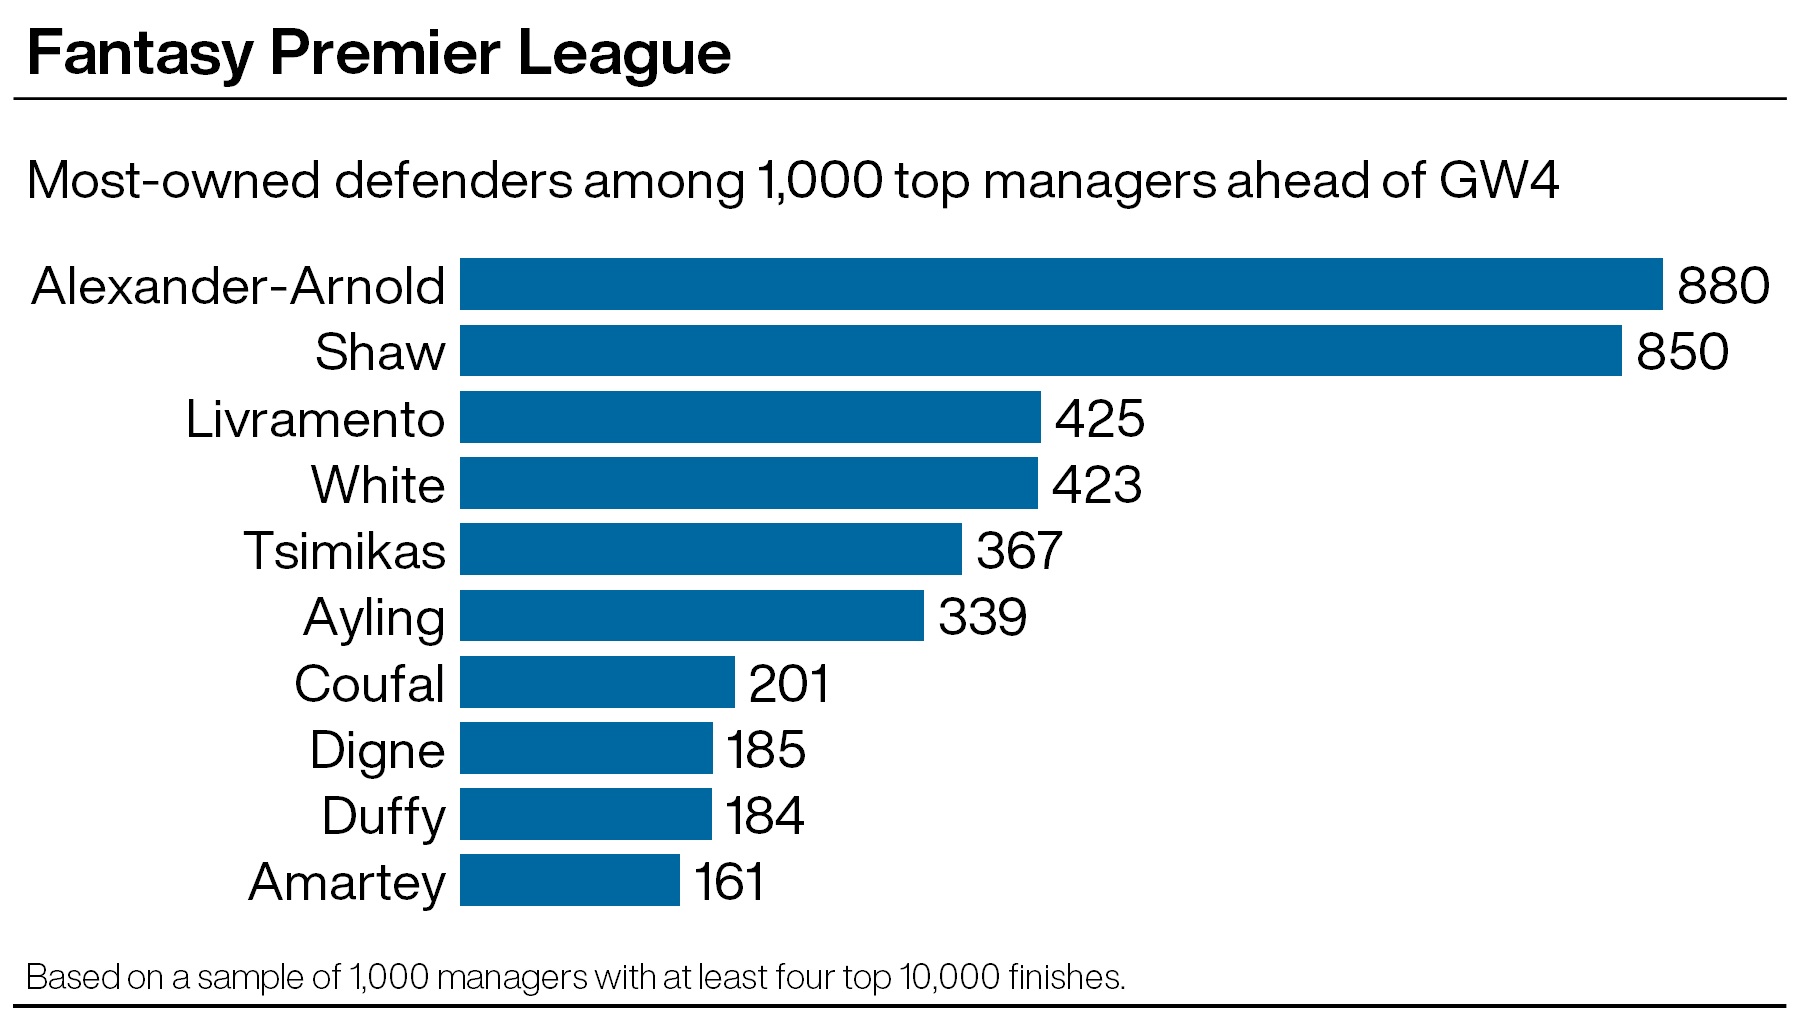 A graphic showing some of the most popular footballers among elite Fantasy Premier League managers ahead of gameweek 4 of the season